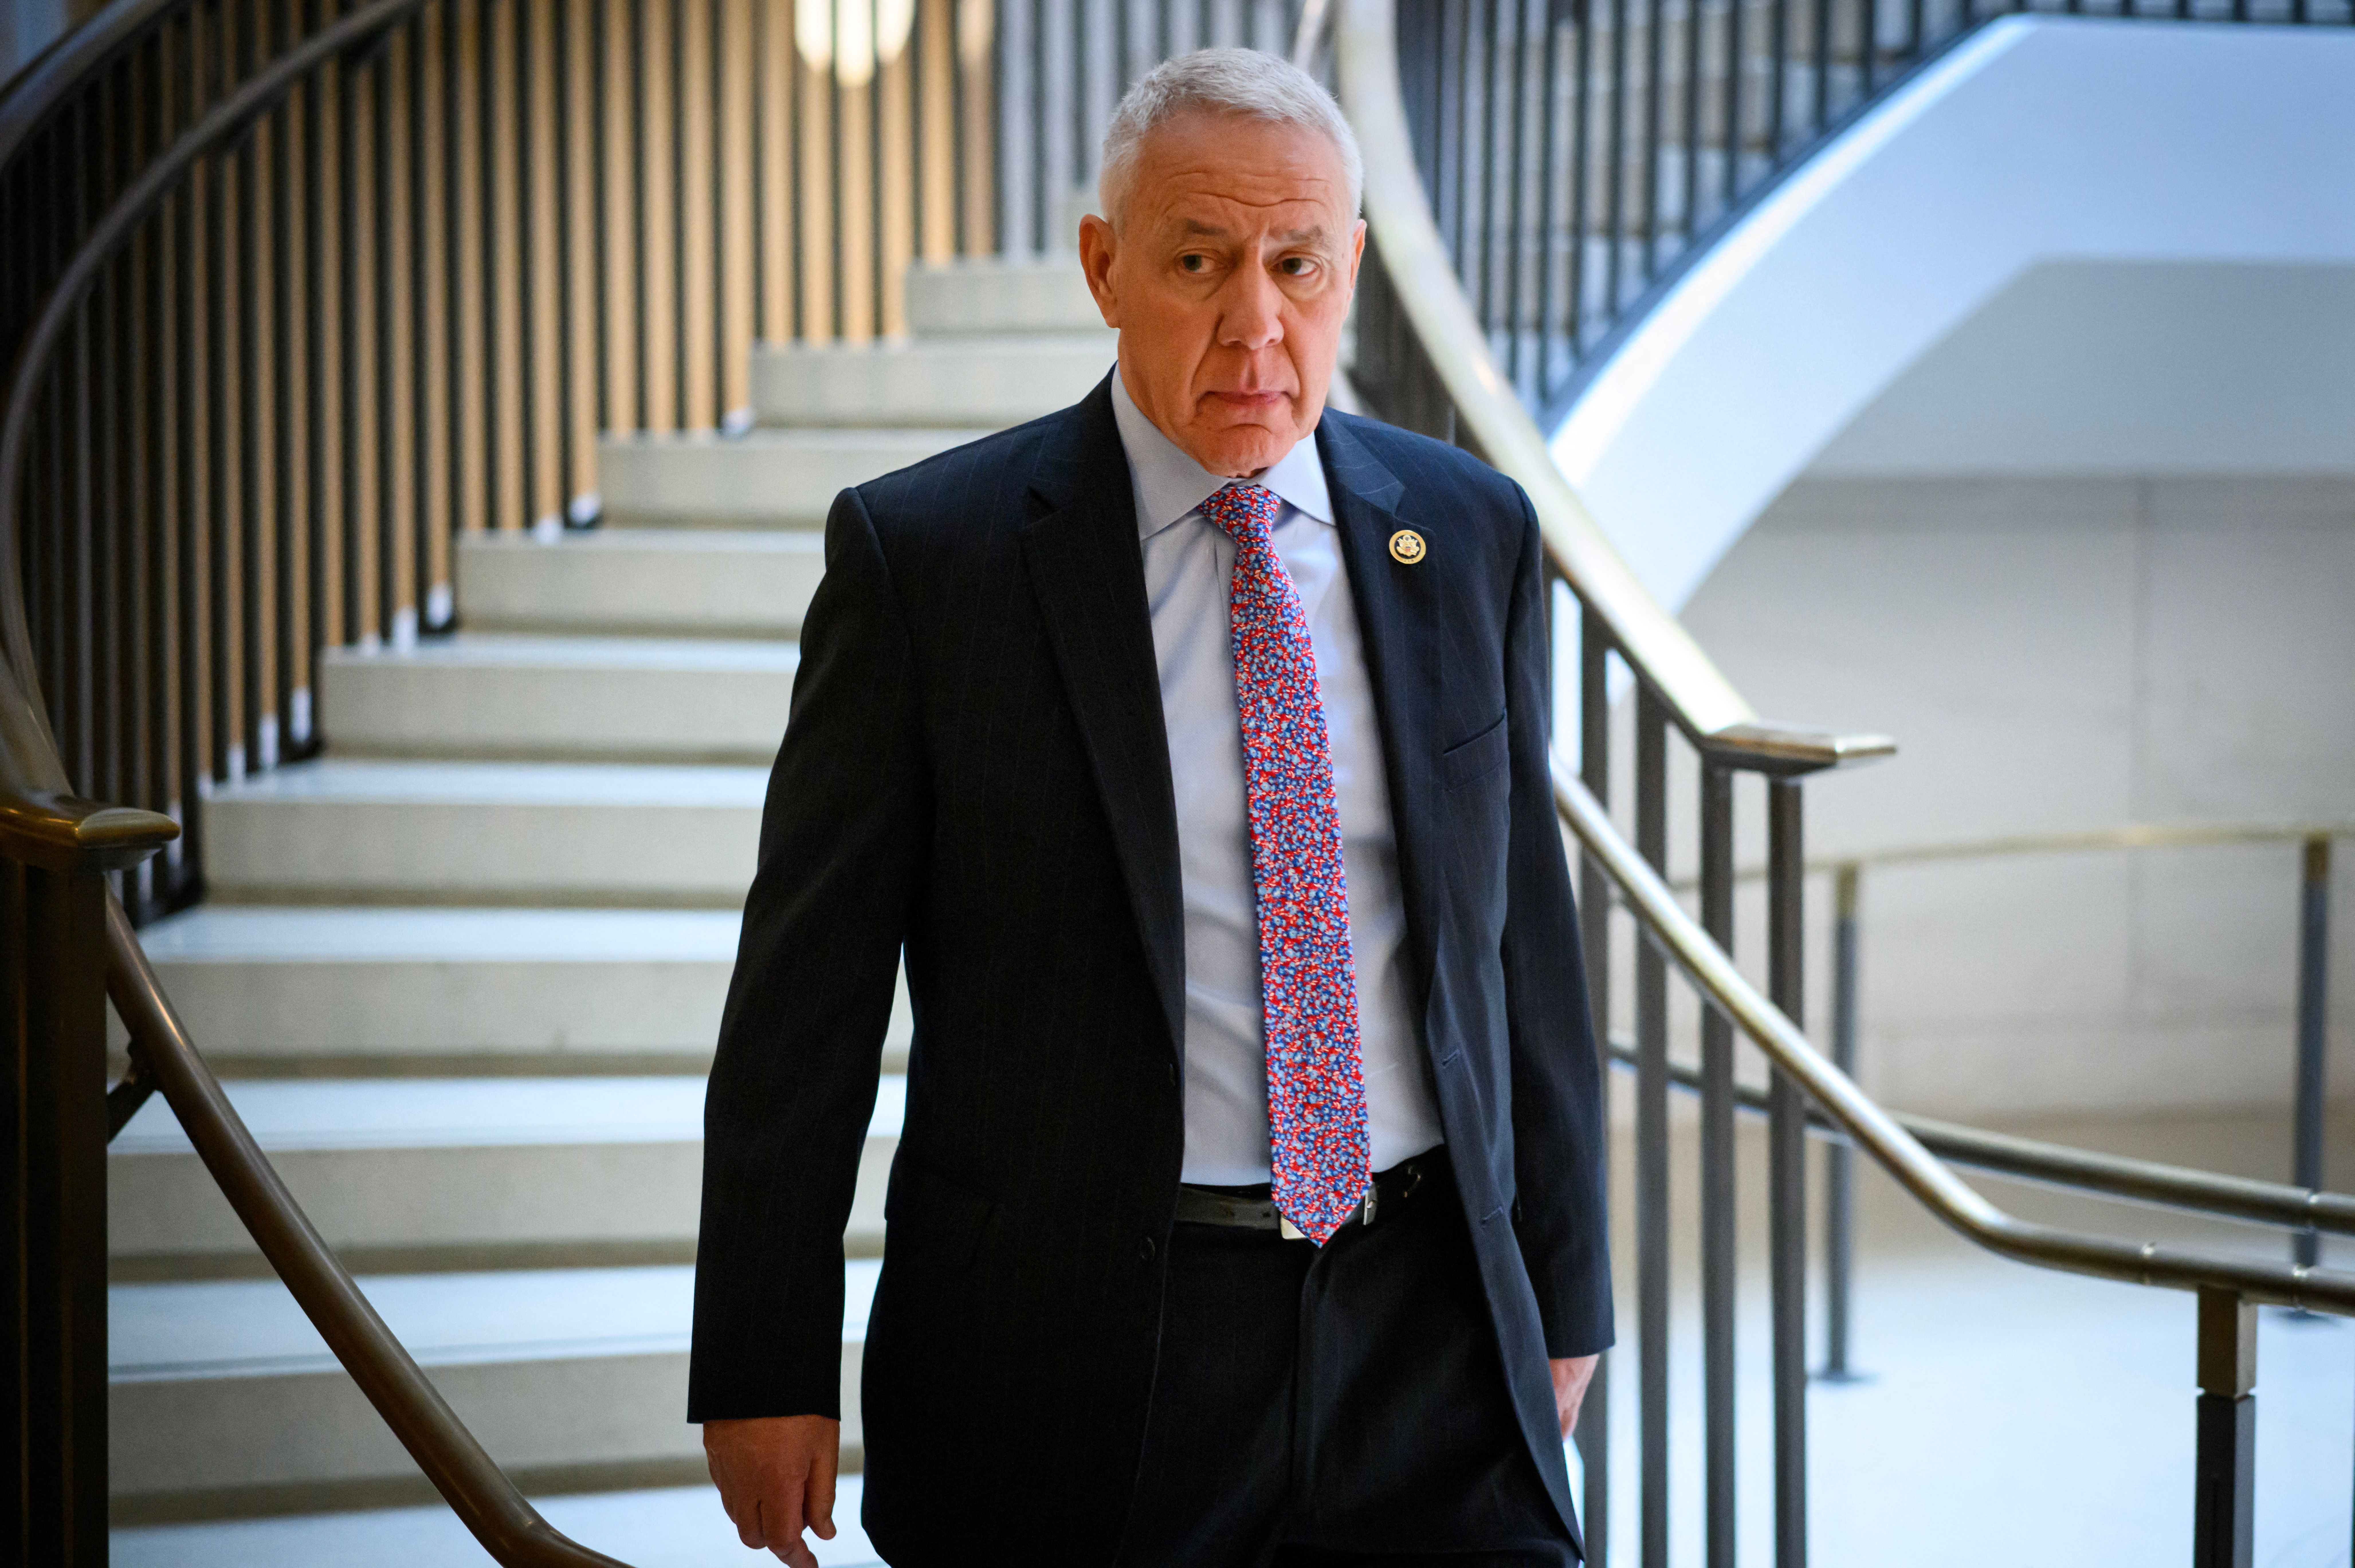 US Rep. Ken Buck, R-CO, arrives for an intelligence briefing by National Security Advisor Jake Sullivan in the US Capitol in Washington, DC, on February 15, 2024. Russia is developing an anti-satellite weapon that is a cause for concern for the United States but poses no direct threat to people on Earth, the White House said on Thursday. (Photo by Mandel NGAN / AFP) (Photo by MANDEL NGAN/AFP via Getty Images)